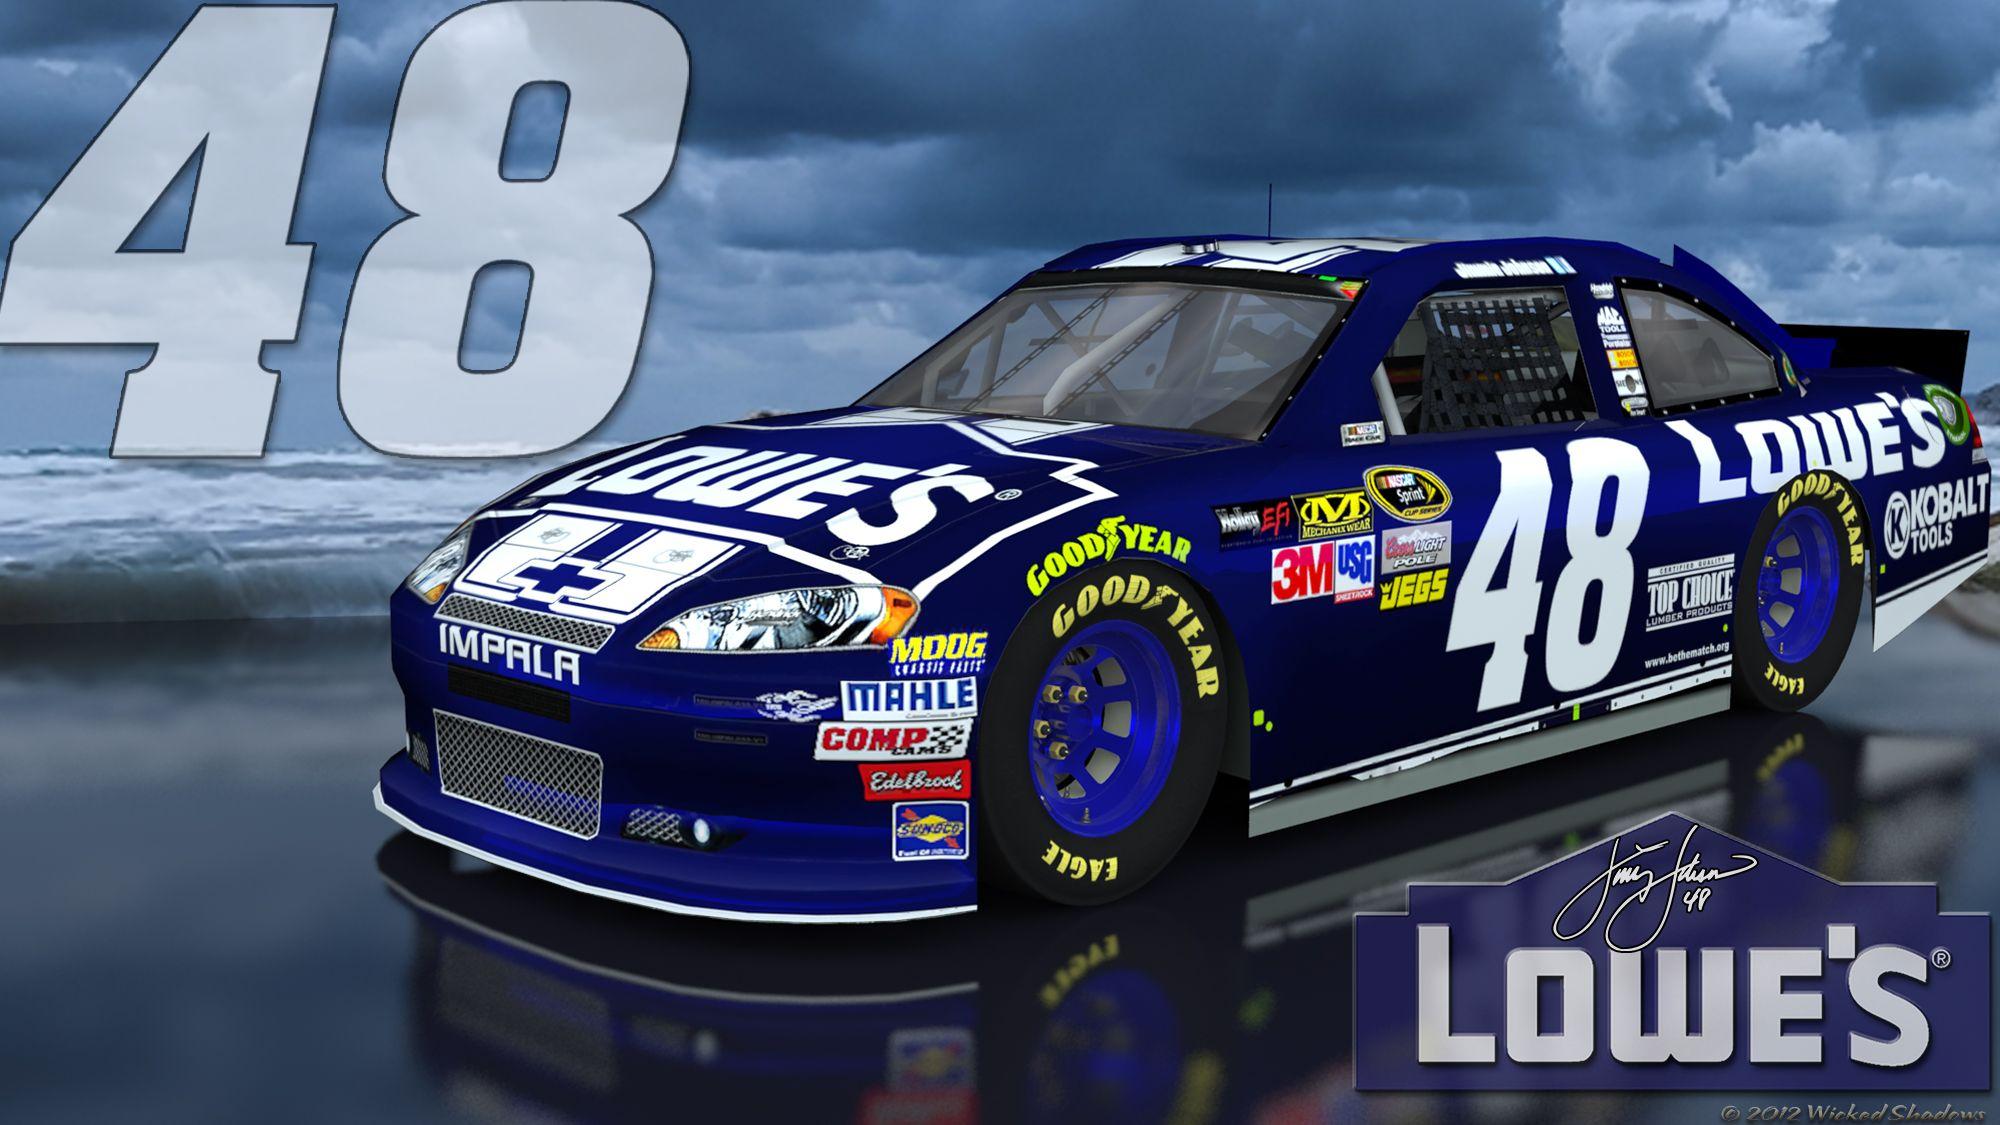 Wallpaper By Wicked Shadows: Jimmie Johnson Lowes 48 Brighter